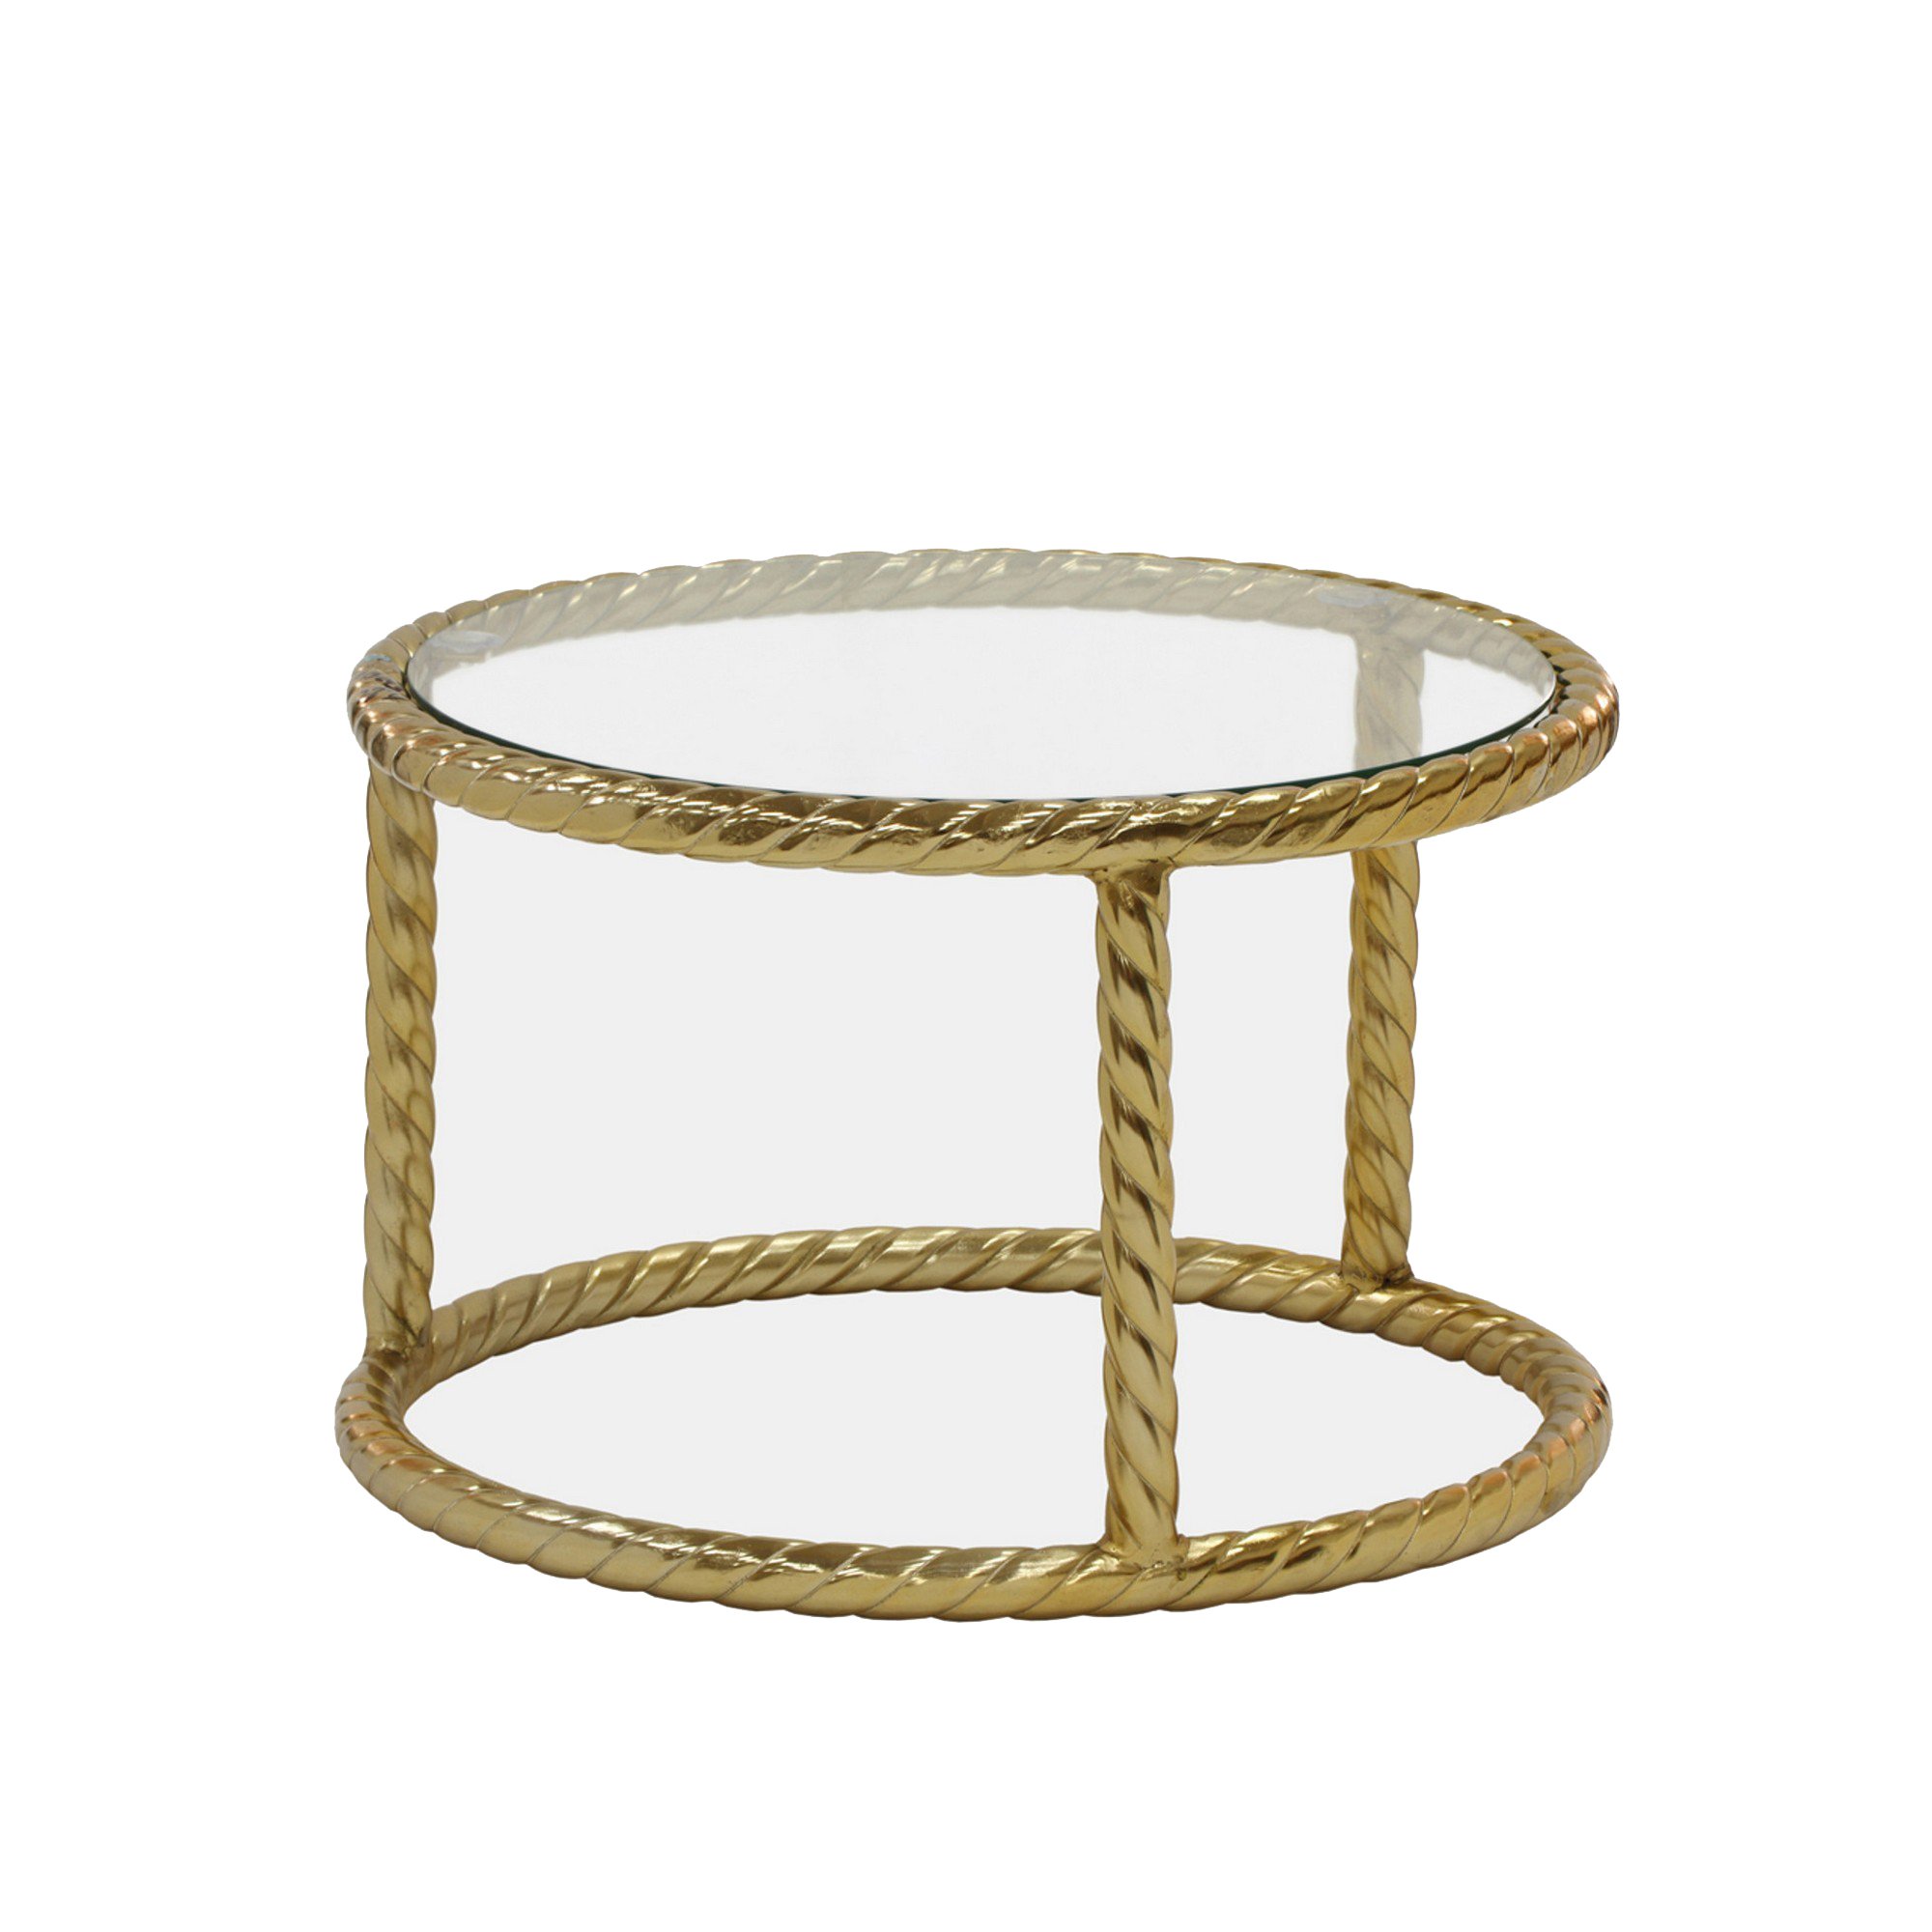 22, 28 Inch Round Nesting Coffee Tables, Glass Top, Gold Metal Rope Frame -Saltoro Sherpi